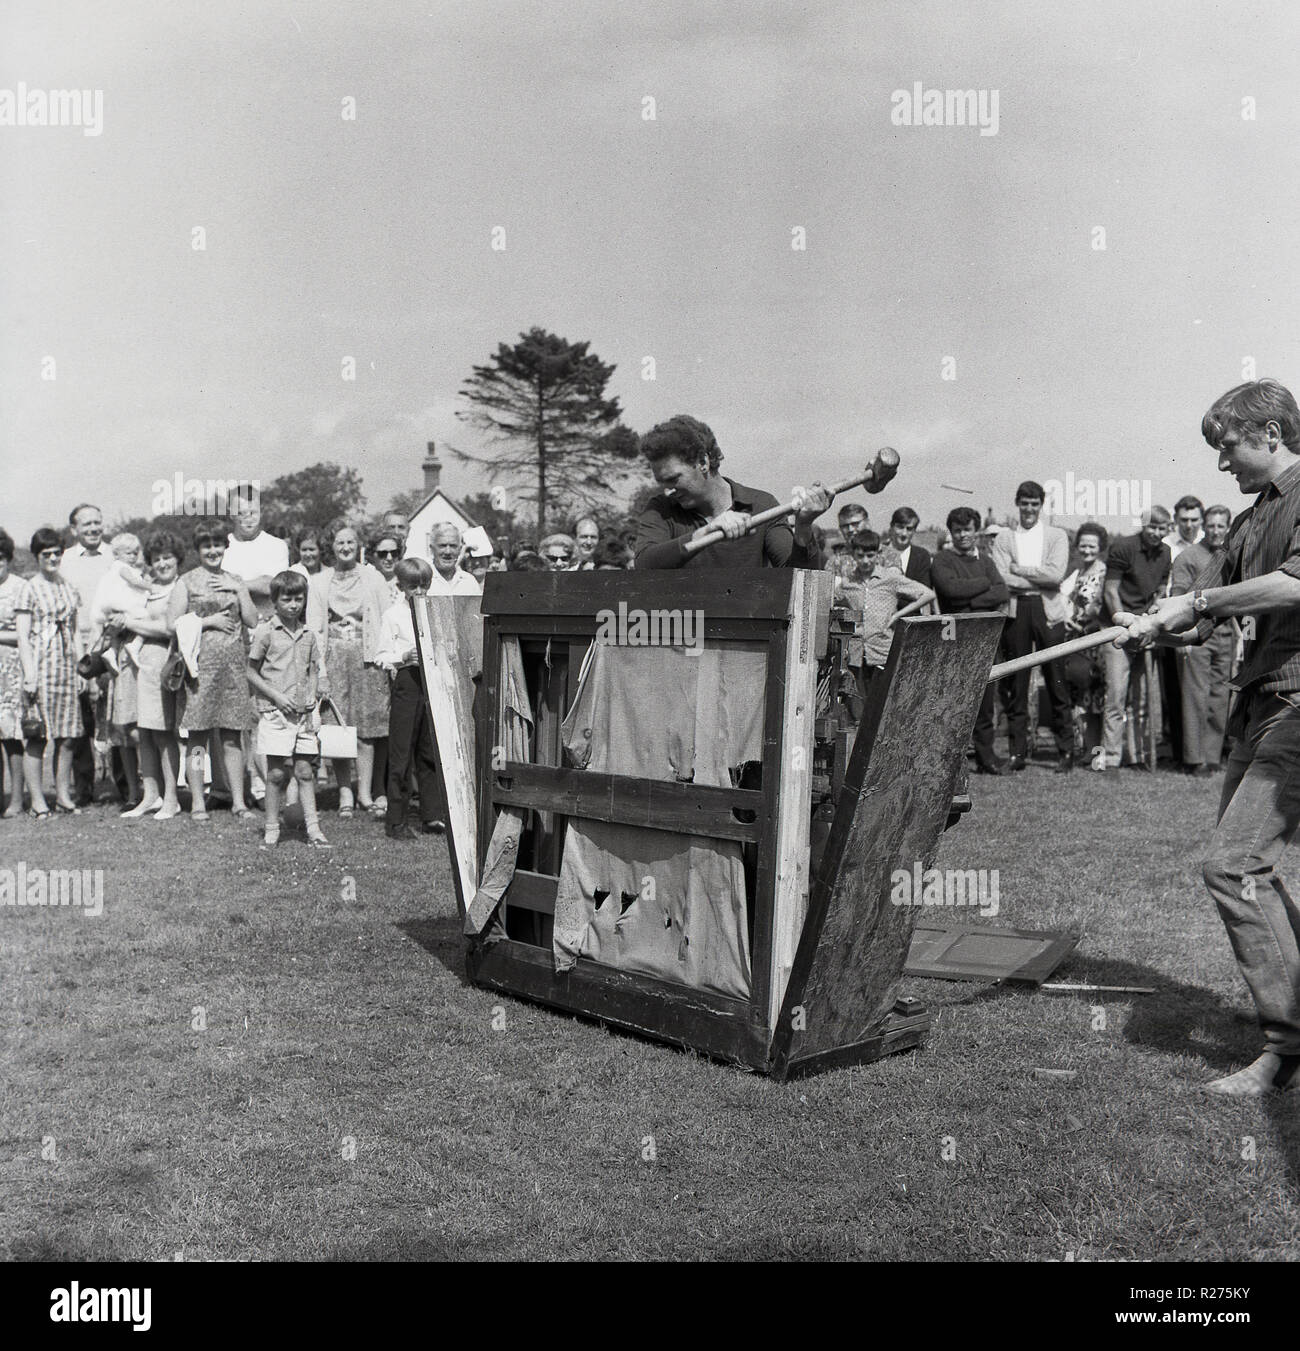 1965, historical, men smashing up an upright piano outside in a field at a village fete, Oxfordshire, England, UK. Piano smashing contests were a popular features of British village fetes in this era, with teams using sledgehammers to destroy the pianos into small enough peices that could be passed through a 9-inch diameter hole, with the winners doing it in the fastest time. Stock Photo